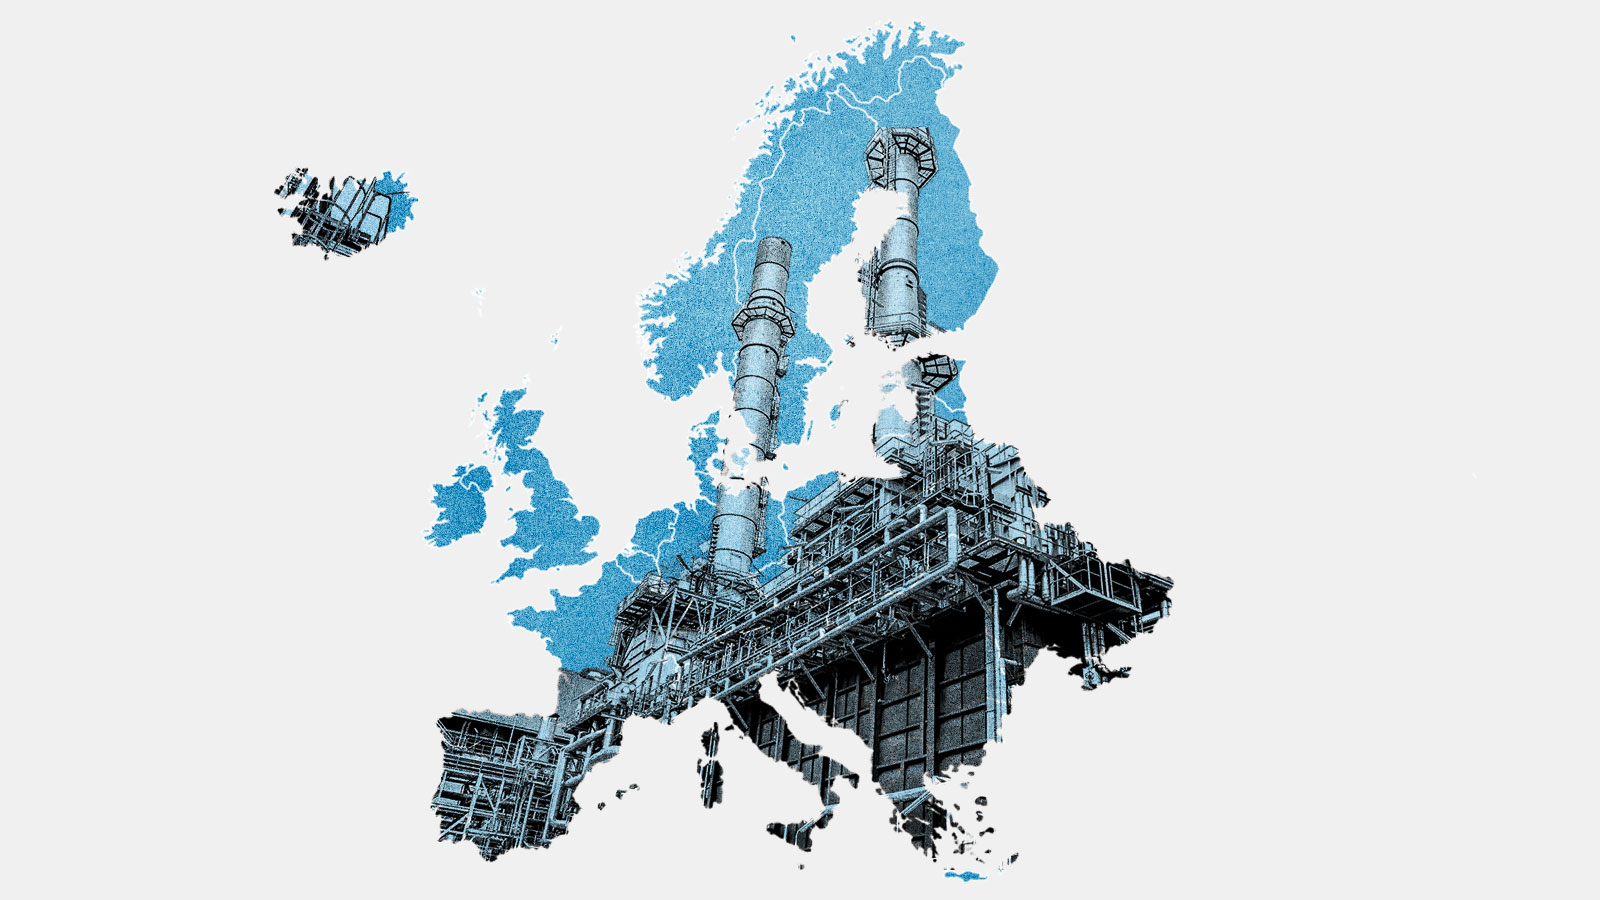 Gas refinery inside a blue silhouette of European countries